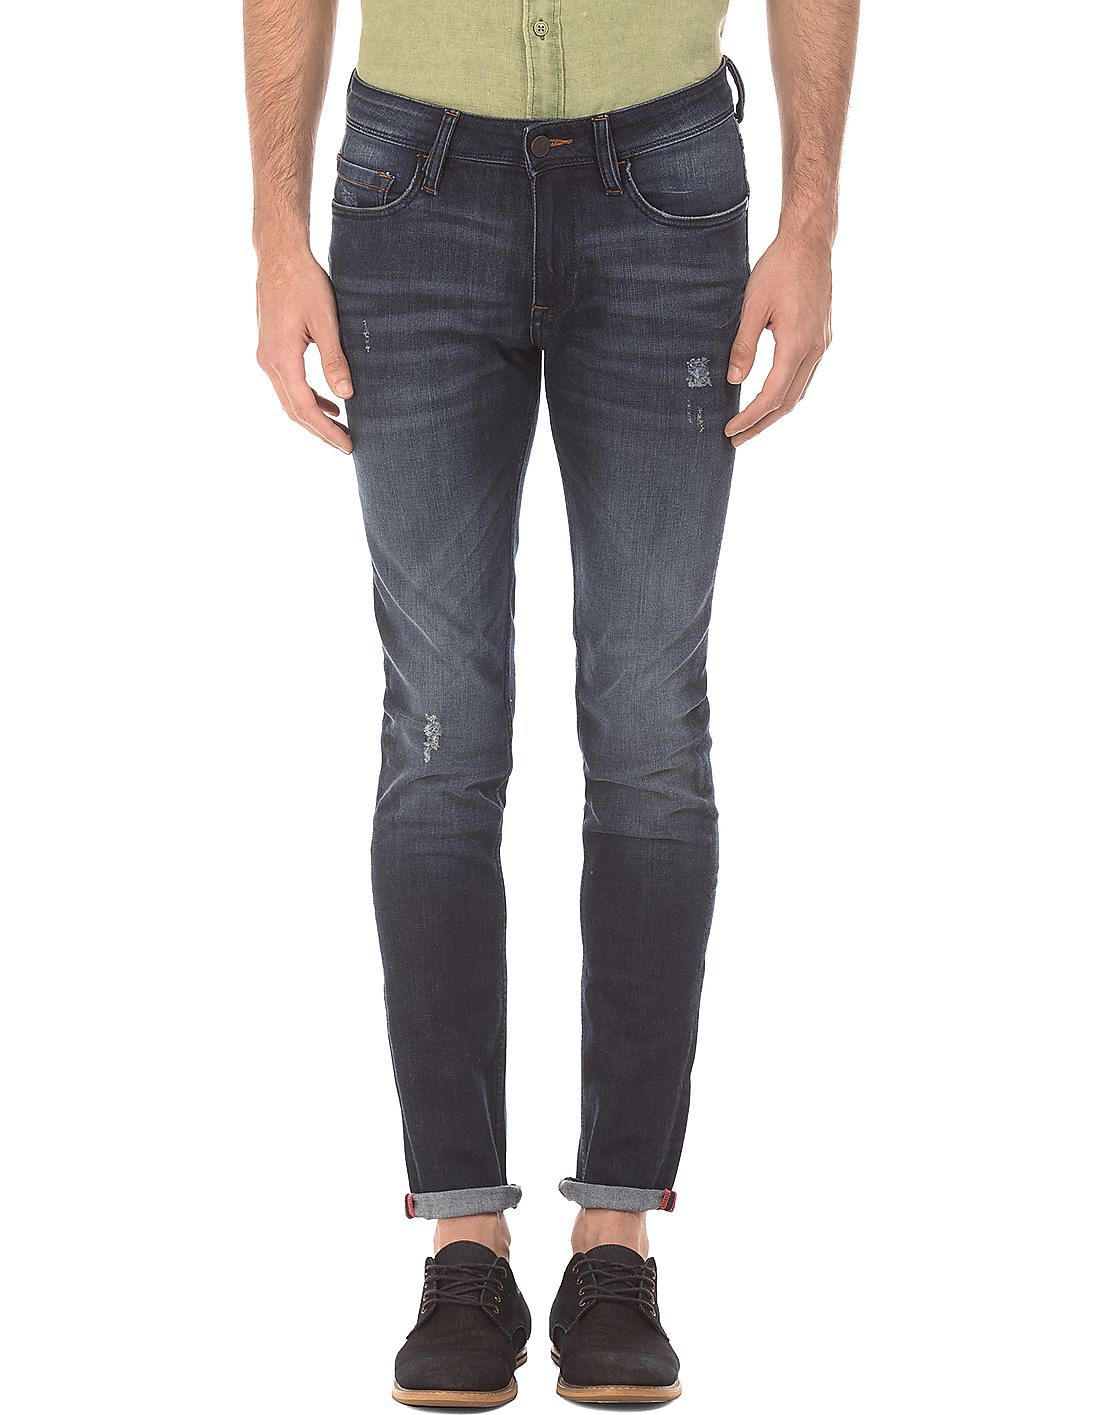 Buy Arrow Blue Jeans Company Skinny Fit Distressed Jeans - NNNOW.com